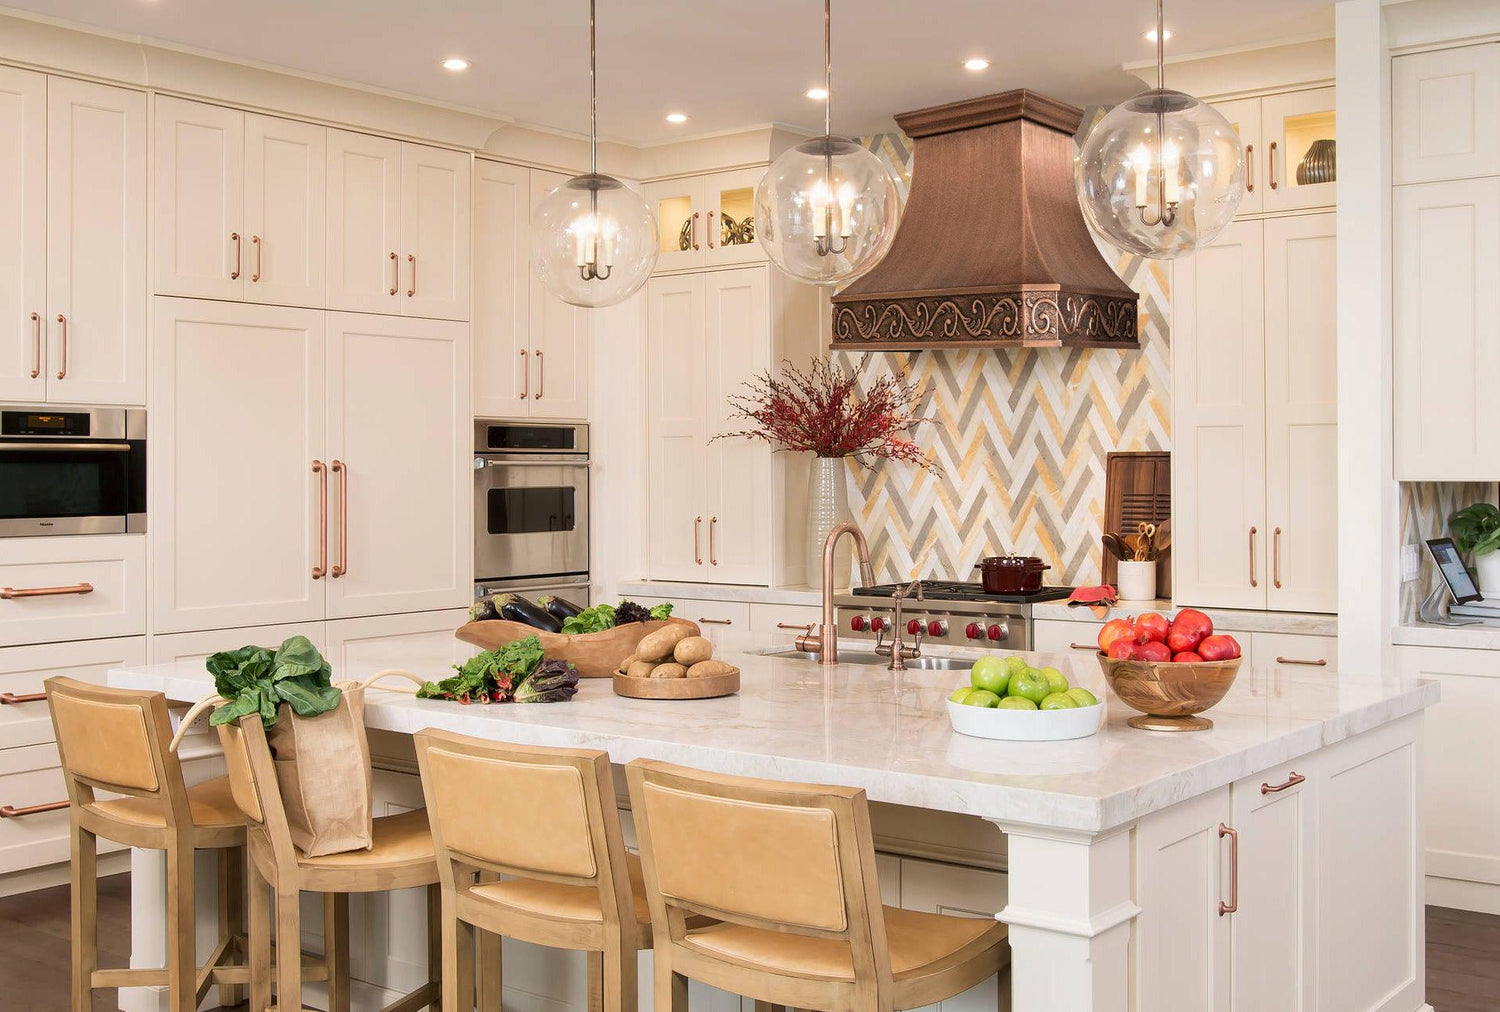 Designing Your Dream Kitchen with a Custom Copper Range Hood on Fobest